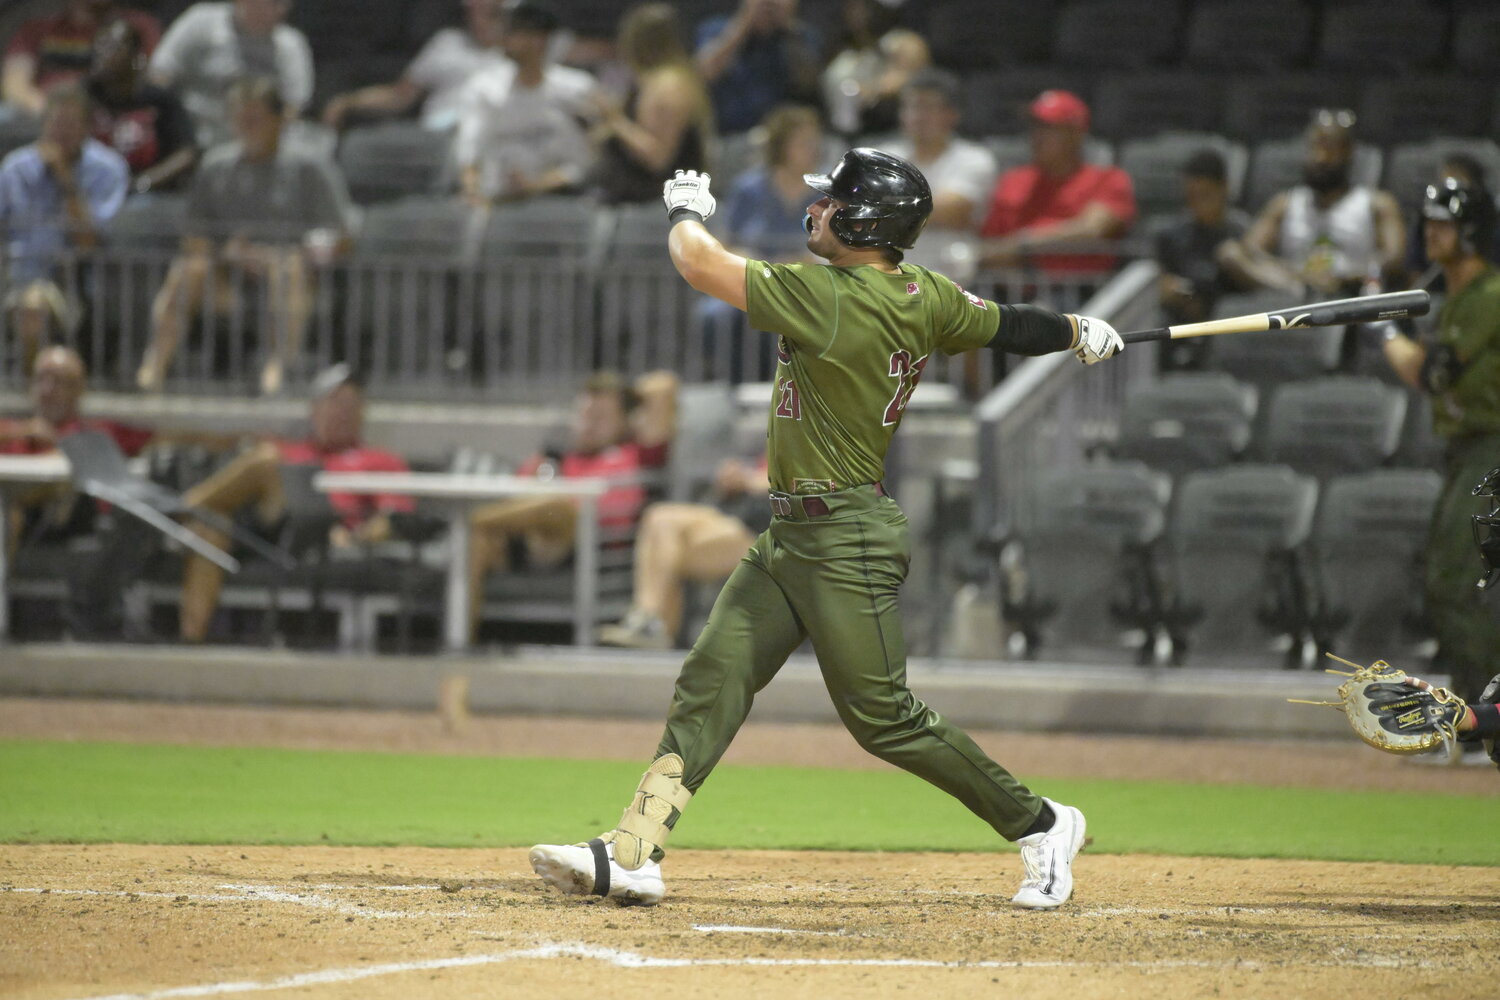 Outfielder Cam Fisher was added to the Woodpeckers’ roster on Aug. 1. After a slow start, the 6-2, 210-pounder finished with a .265 average with five homers and 15 RBIs in 113 at-bats.